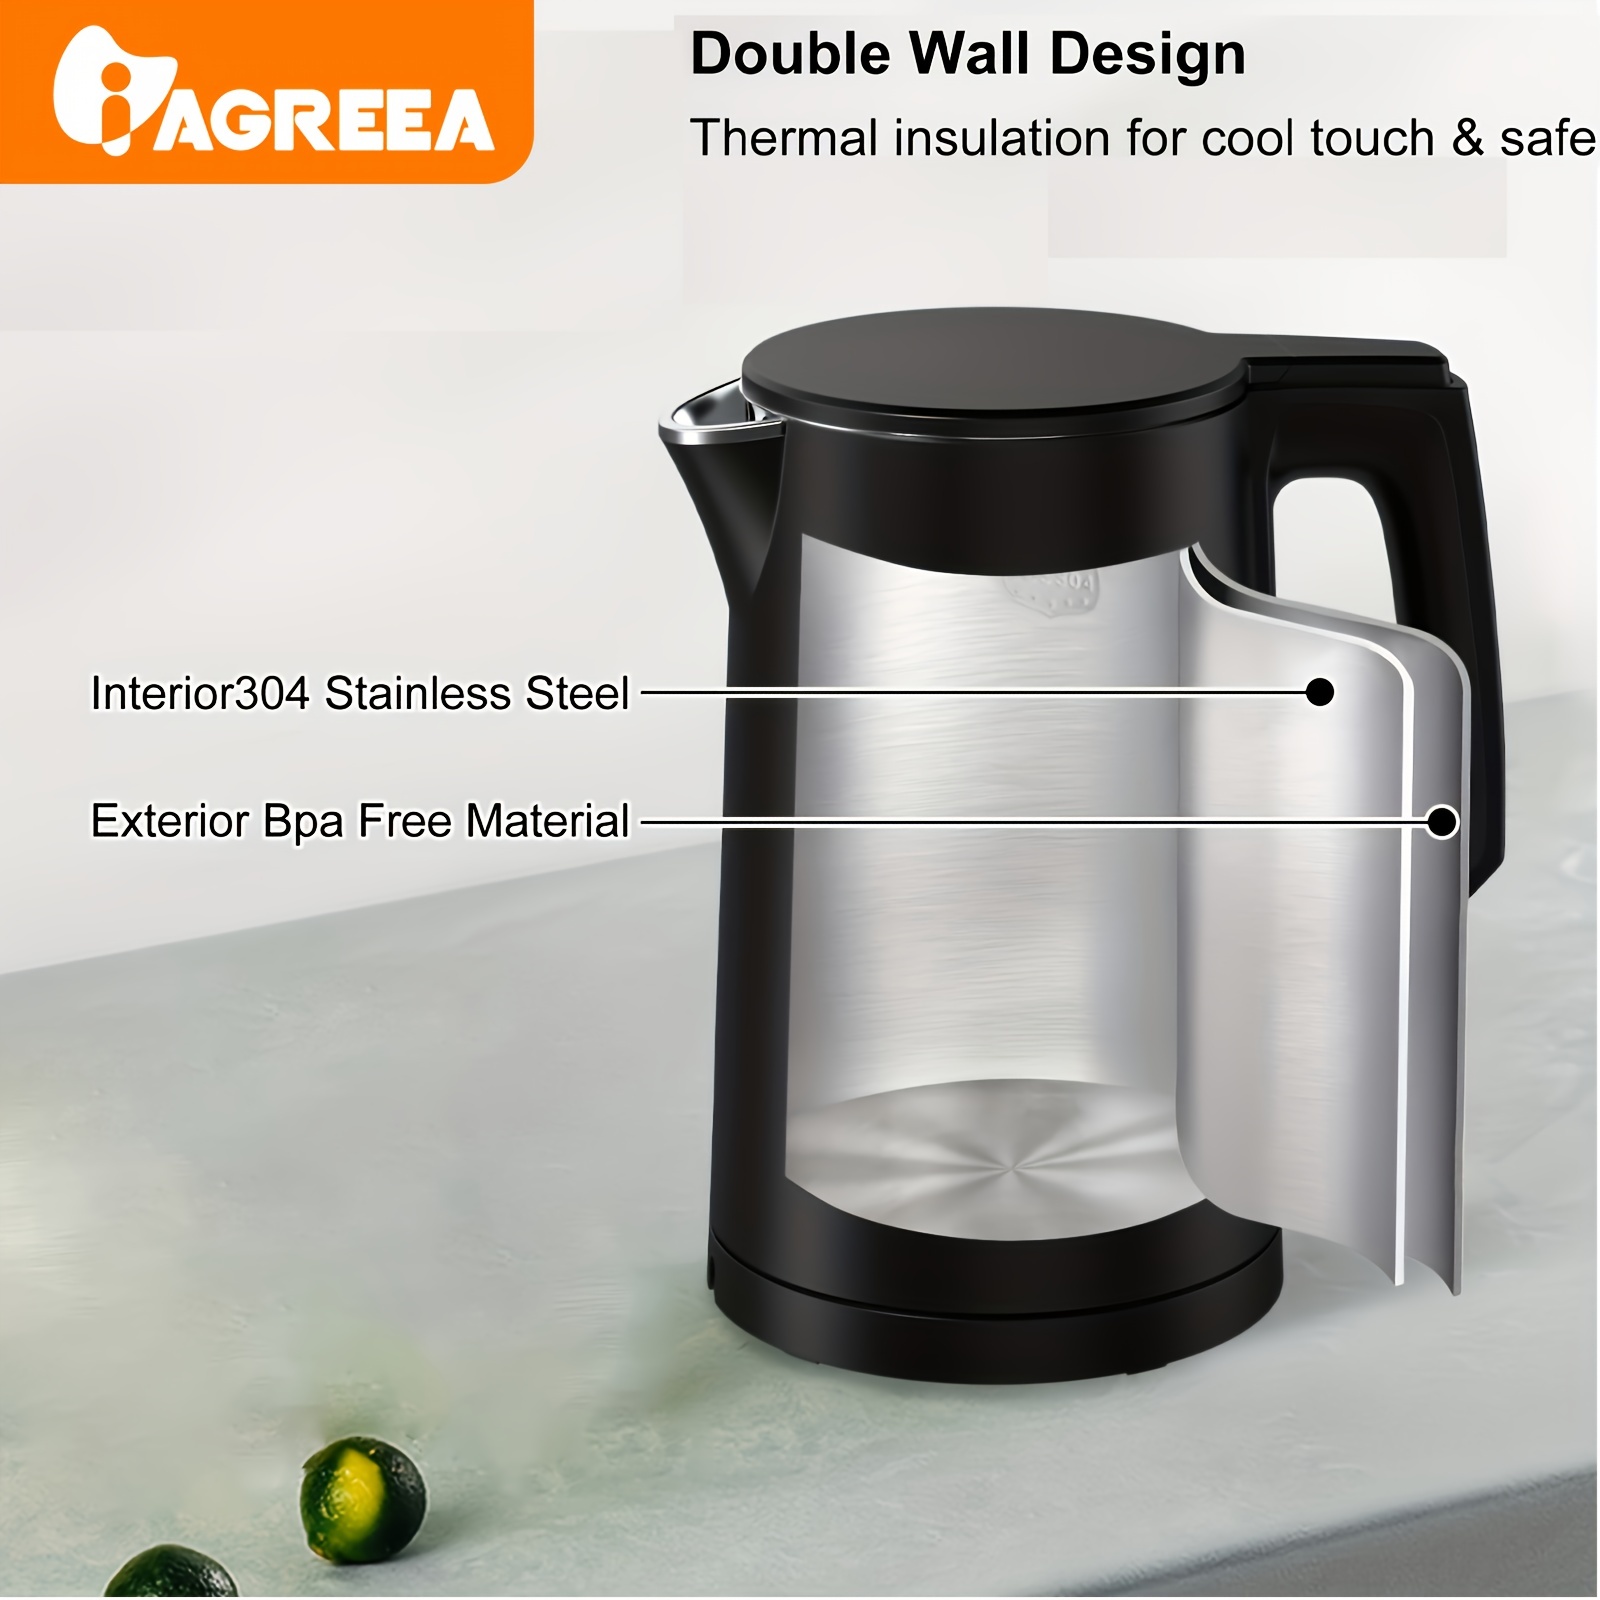 Electric Tea Kettle, 1.7L Hot Water Boiler with Thermometer, 1800W